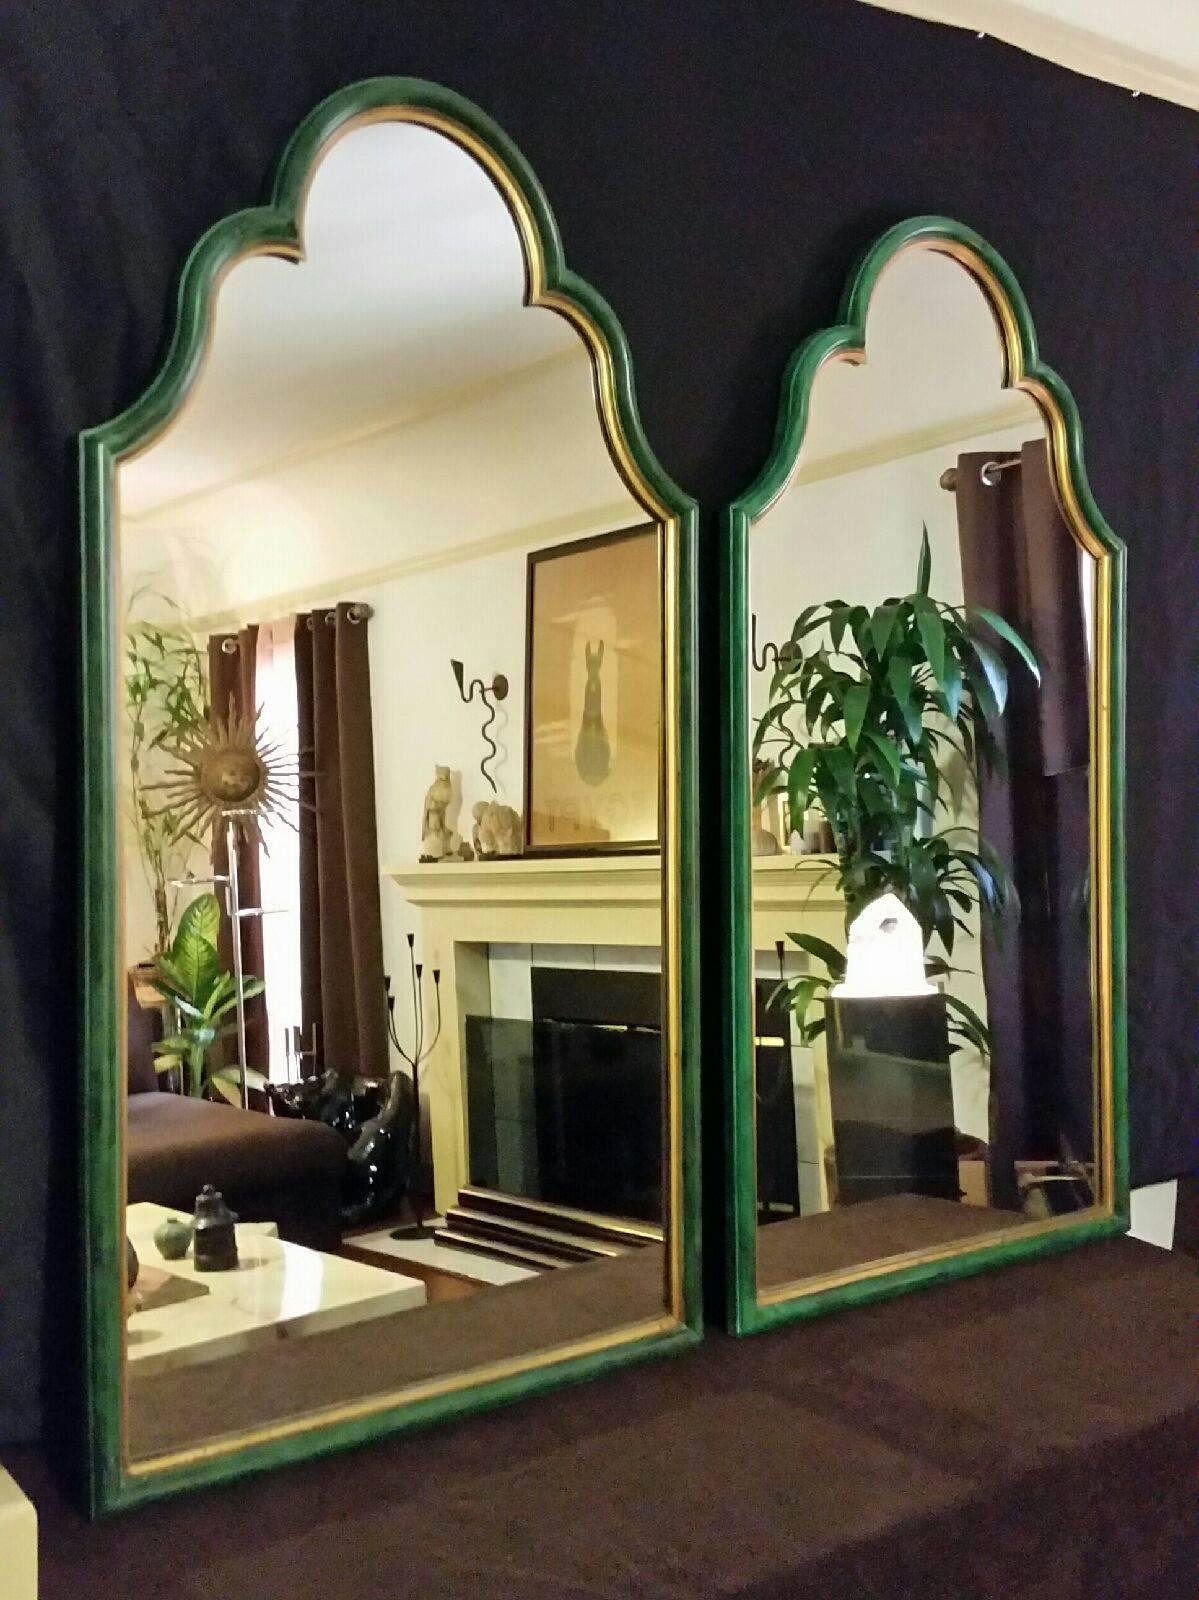 A striking pair of wall mirrors acquired from the famous La Valencia Hotel in La Jolla California after a recent remodeling project. Constructed out of wood with faux green malachite finish and gold detailed trim. True beauties.

The shape and